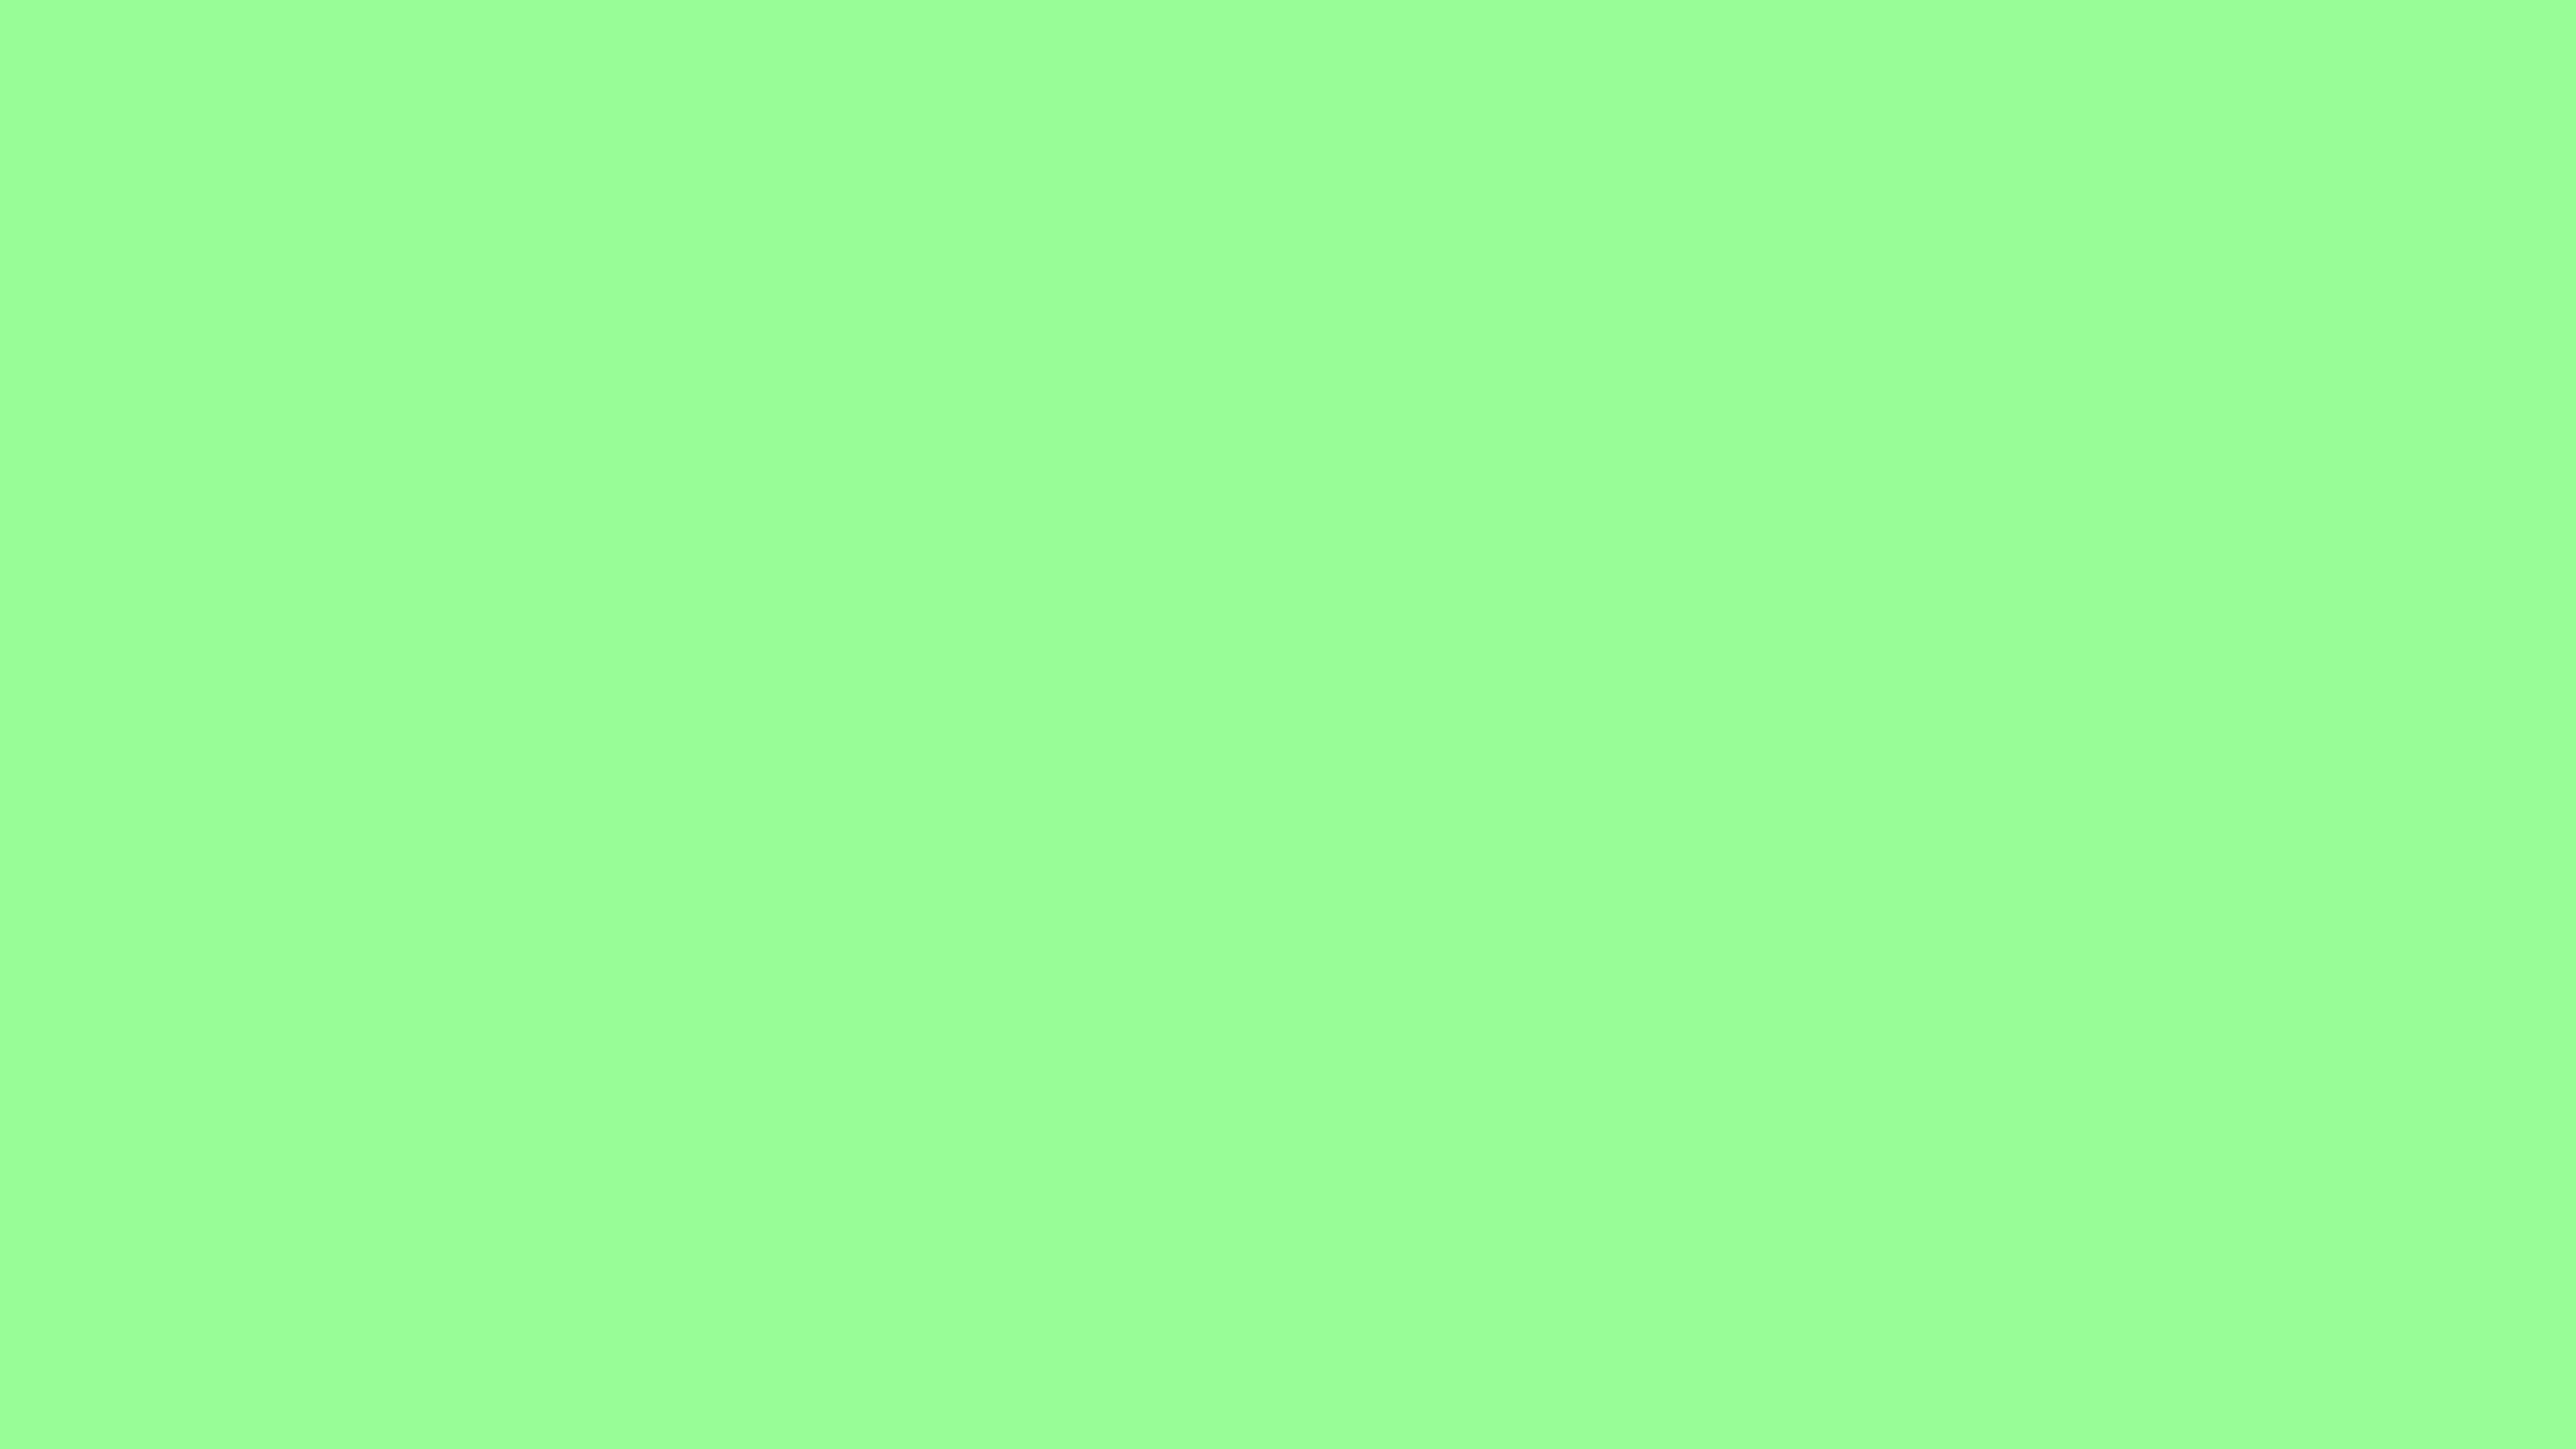 7680x4320 Pale Green Solid Color Background